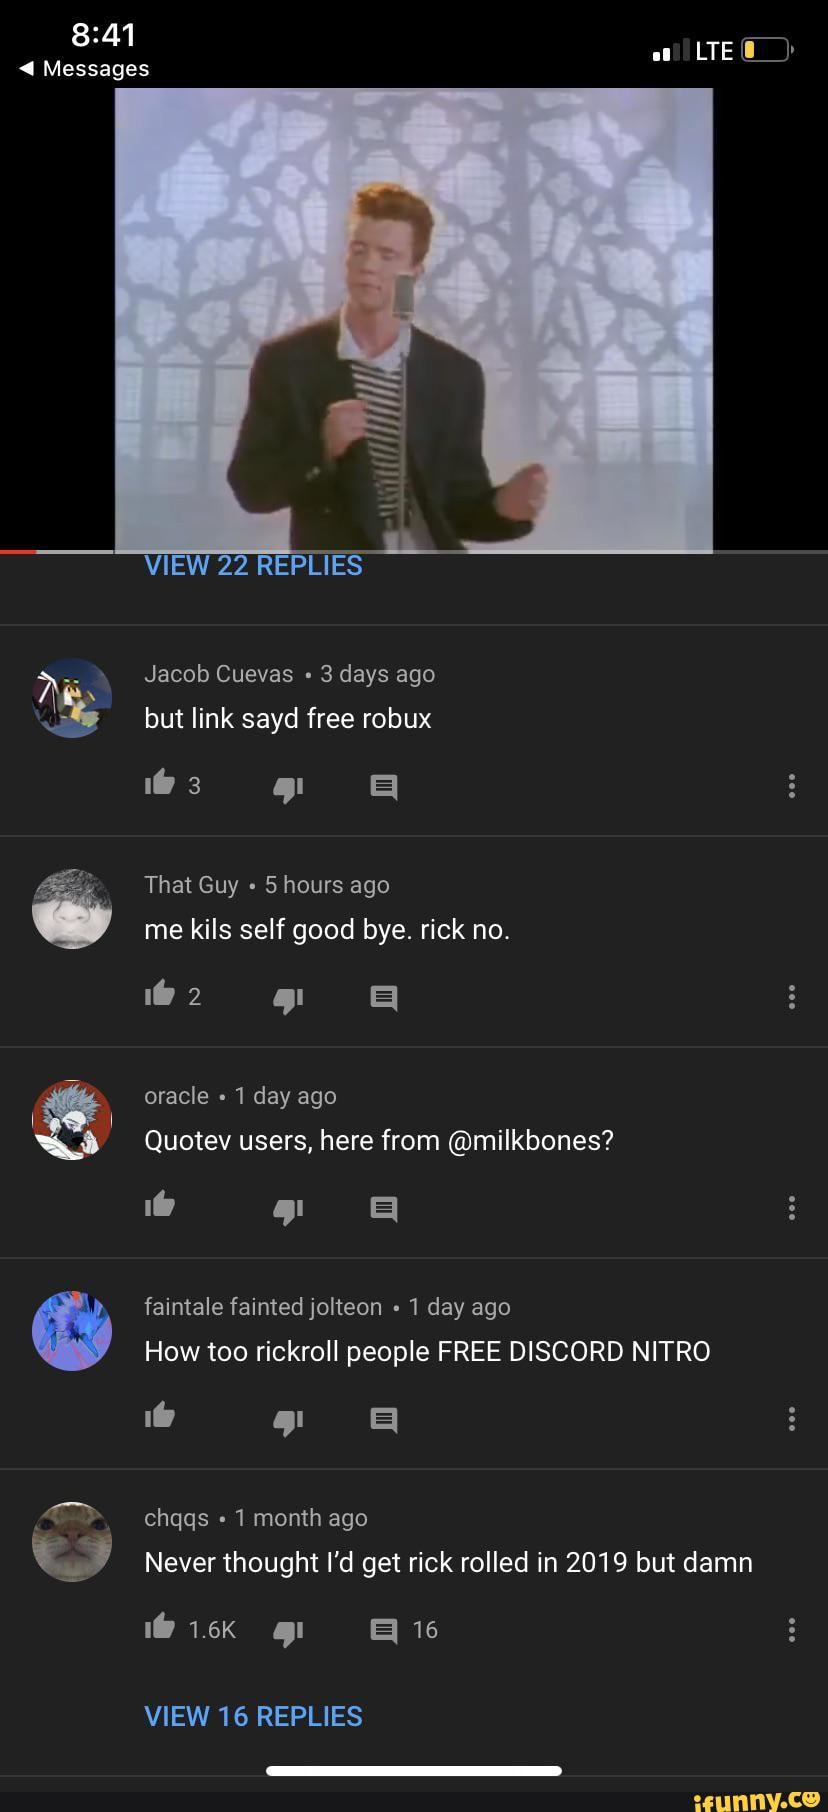 How Too Rickroll People Free Discord Nitro Never Thought I D Get Rick Rolled In 2019 But Damn G1 I 1 6k I A 16 Ifunny - how to get robux for free discord link